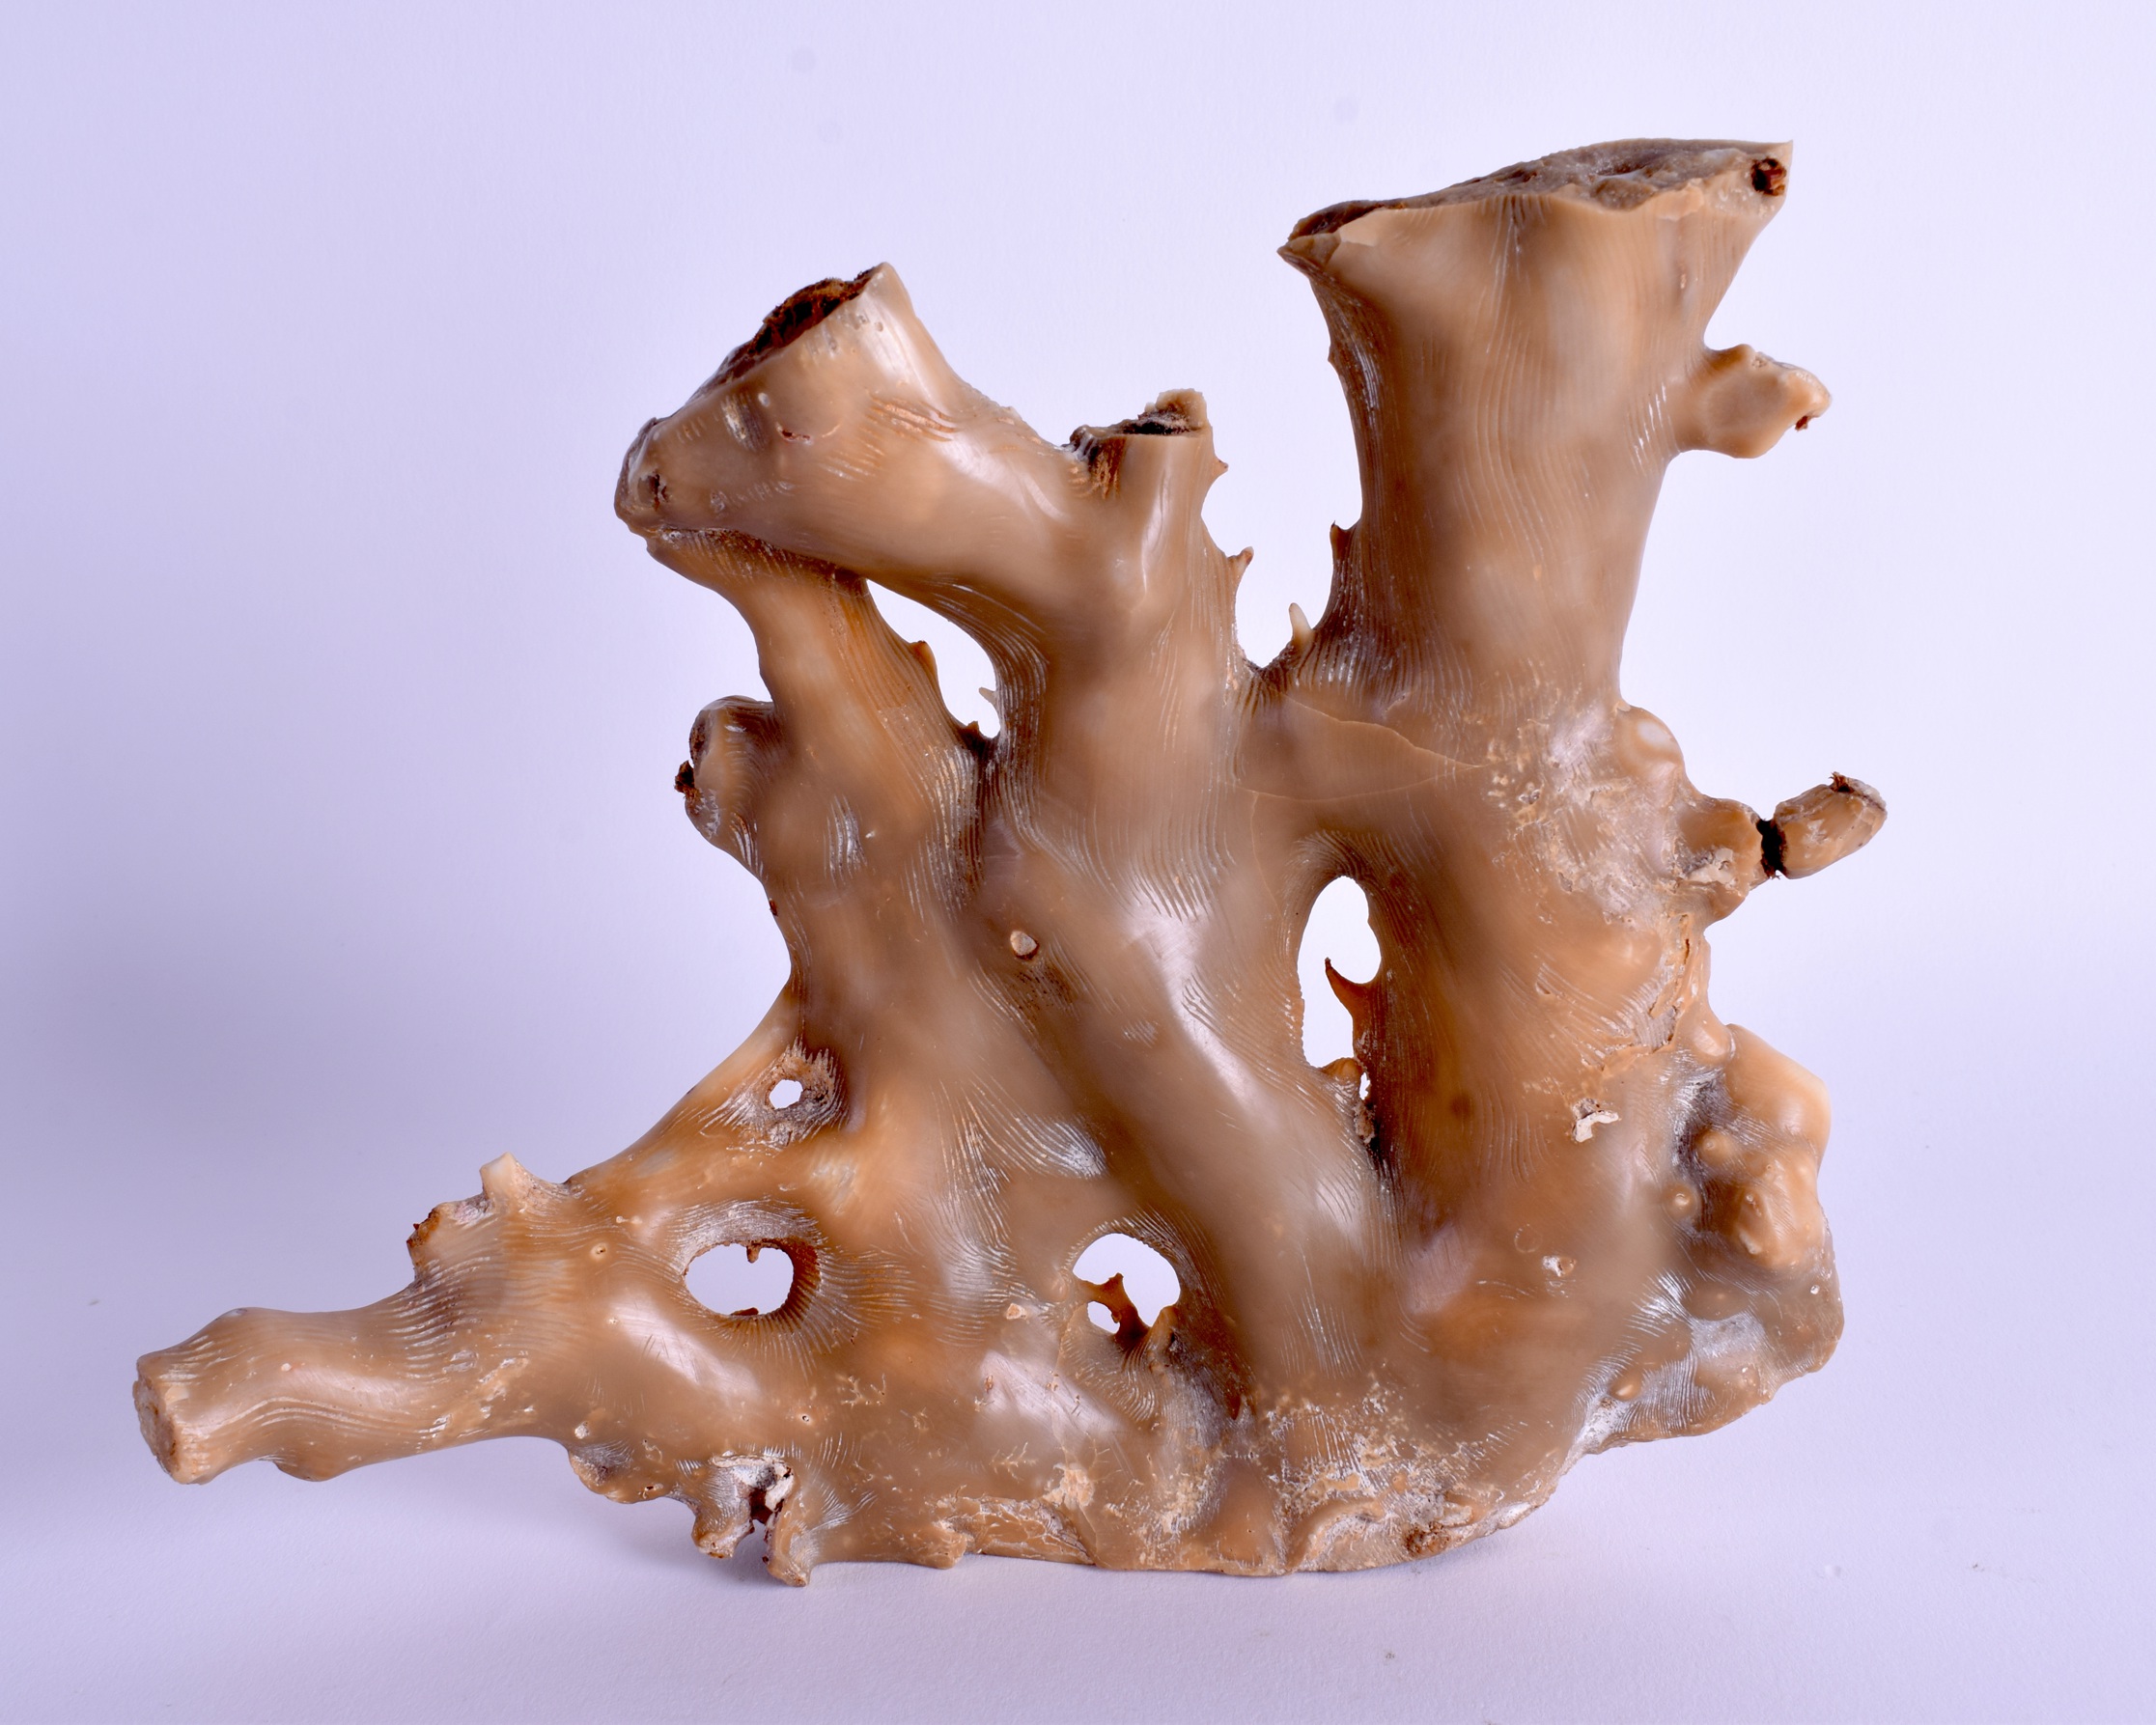 AN EARLY 20TH CENTURY CARVED WHITE CORAL SCULPTURE. 19 cm x 17 cm.